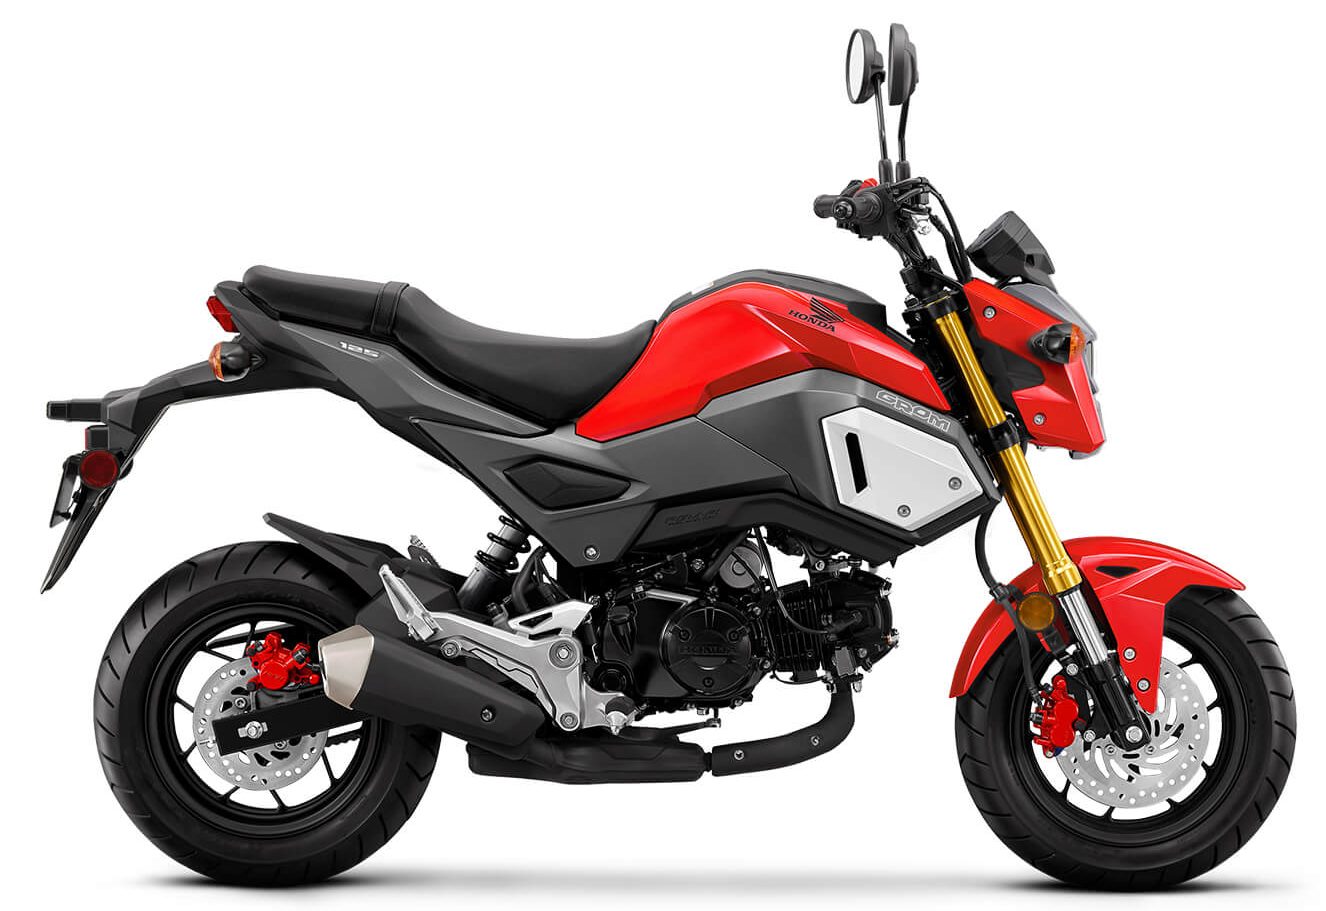 2020 Honda Grom 125 Officially Unveiled; India Launch Uncertain - wide